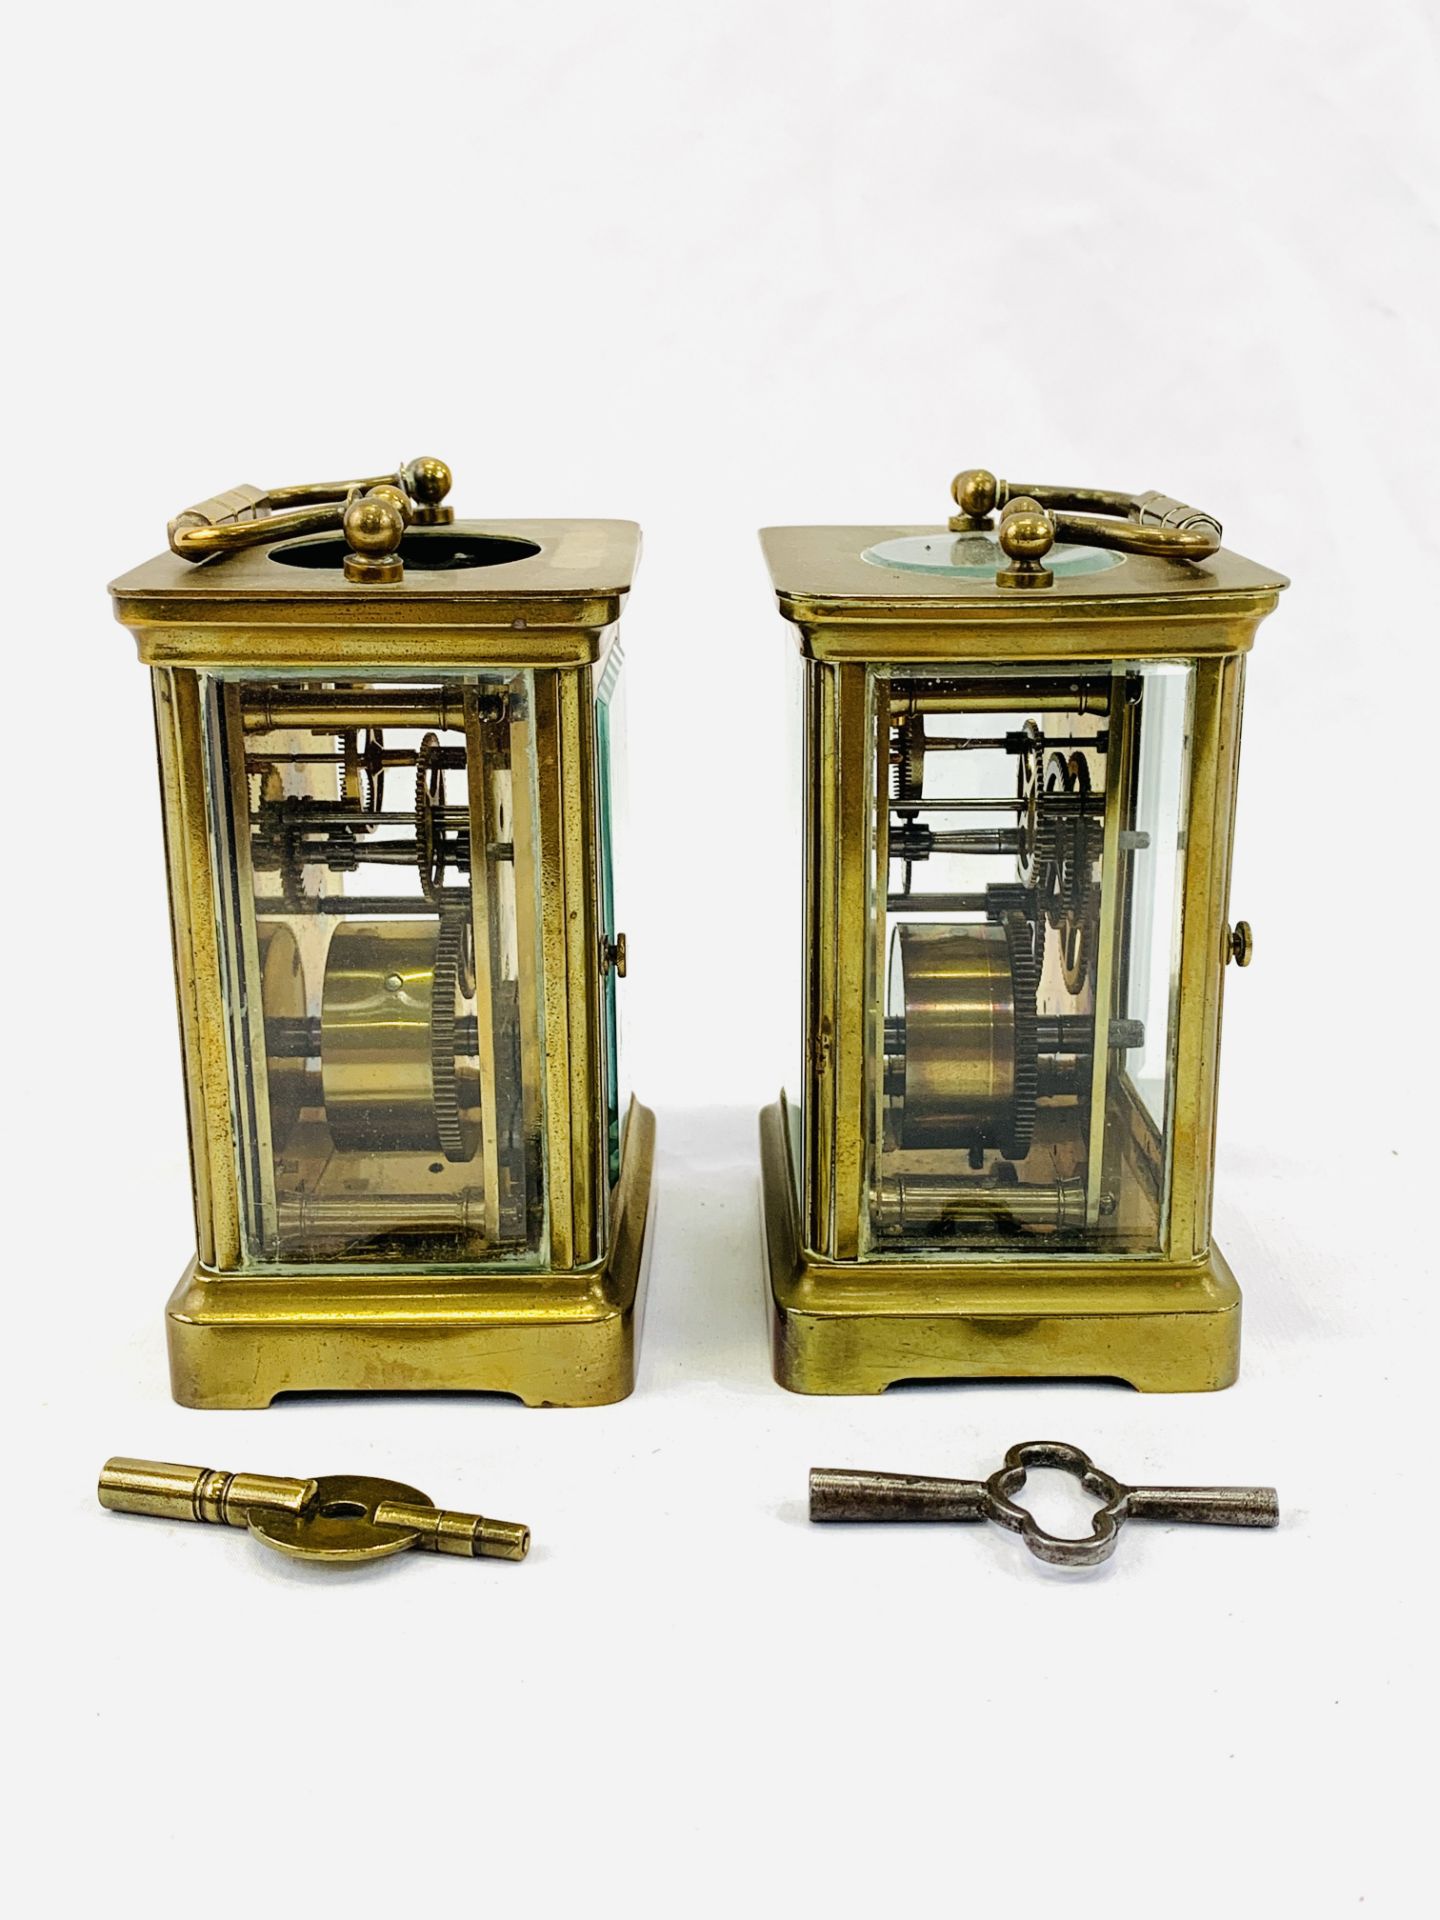 Two brass carriage clocks - Image 3 of 4